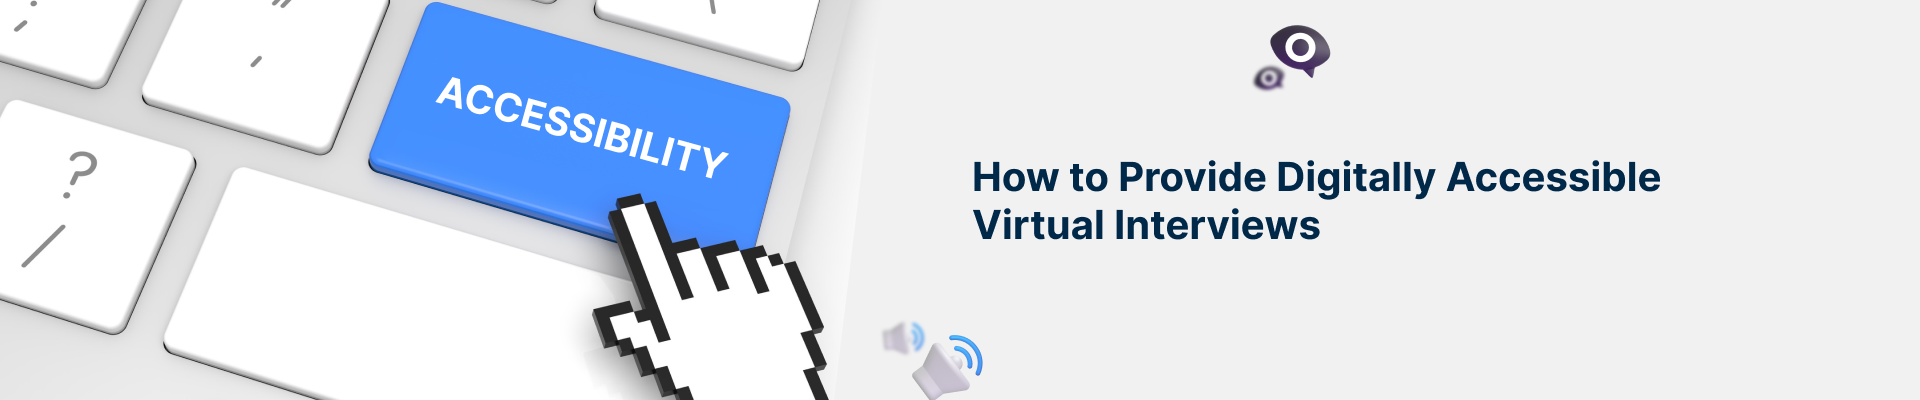 How to Provide Digitally Accessible Virtual Interviews